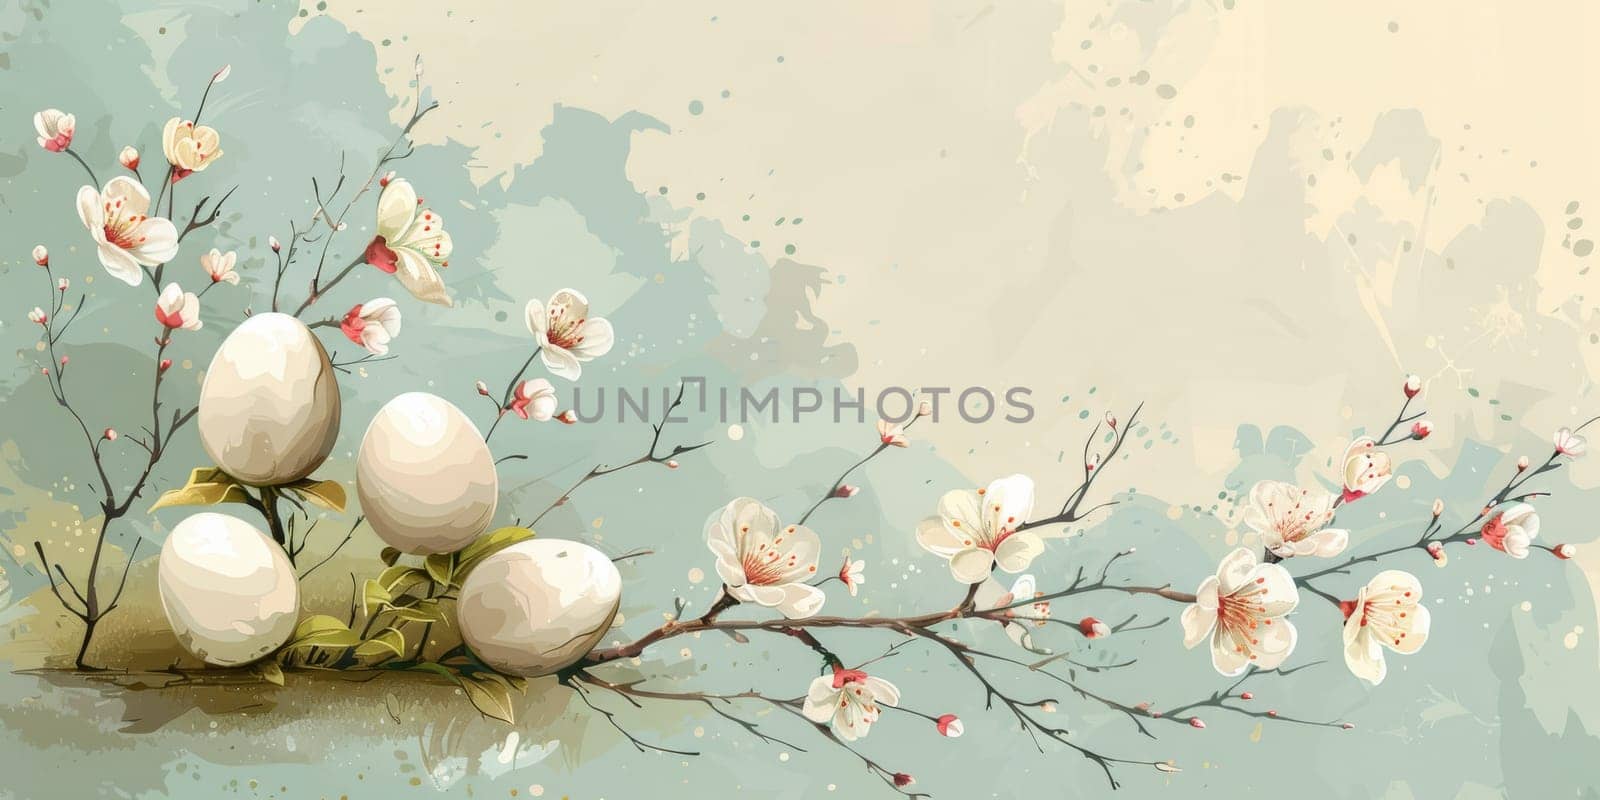 Happy Easter! Colorful Easter chocolate eggs with cherry blossoms flat lay background. Stylish tender spring template with space for text. Greeting card or banner